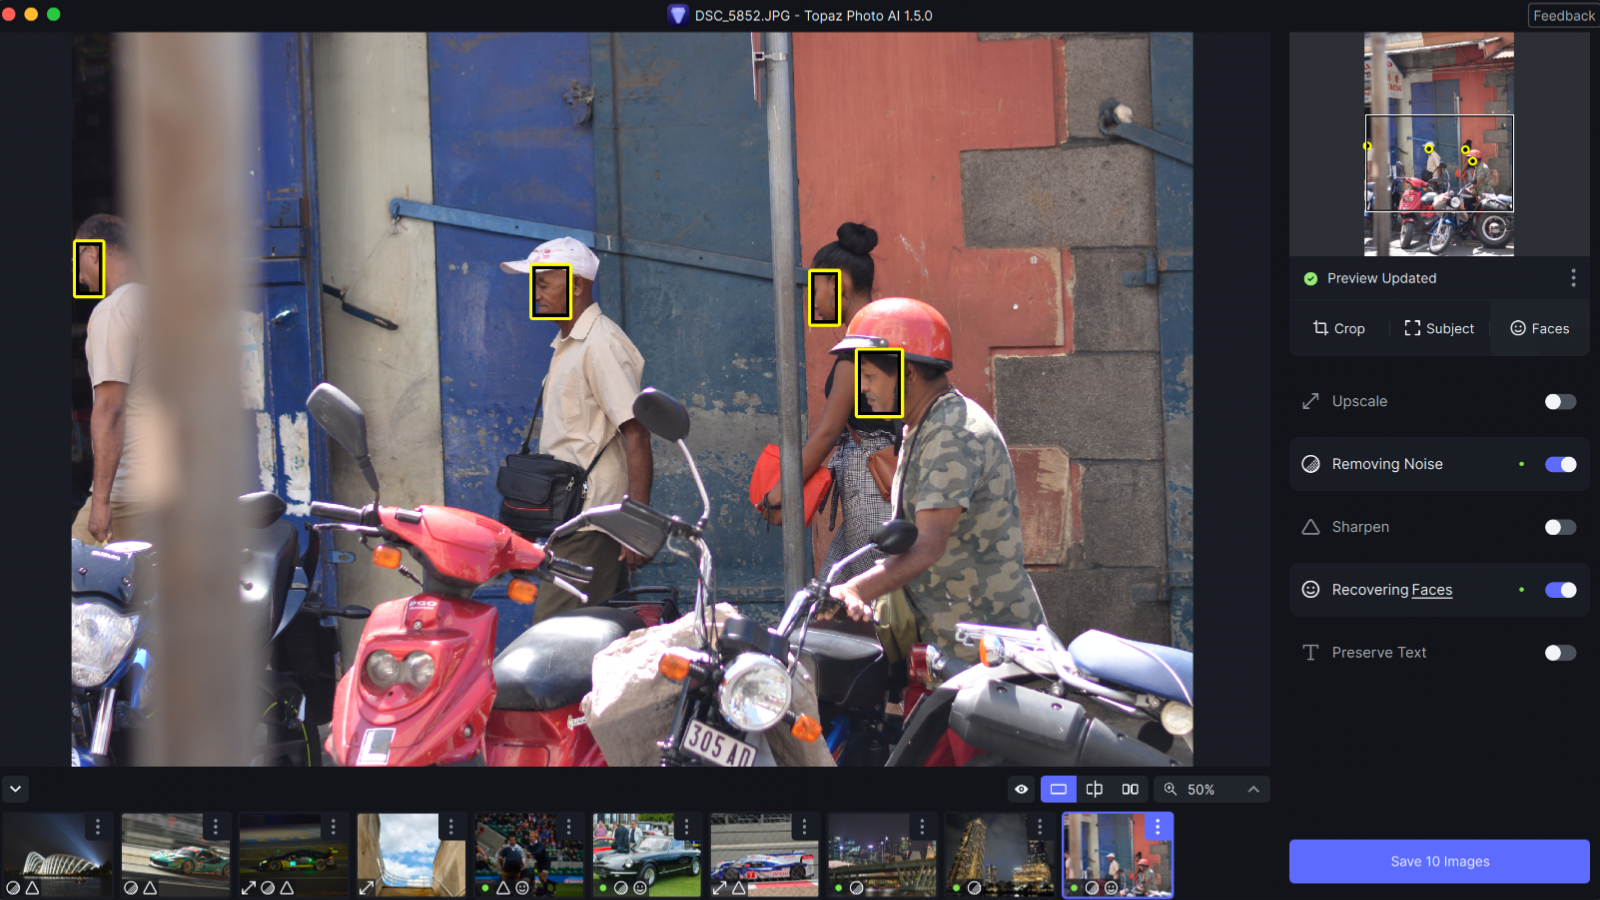 Topaz Photo AI detecting faces in a street scene